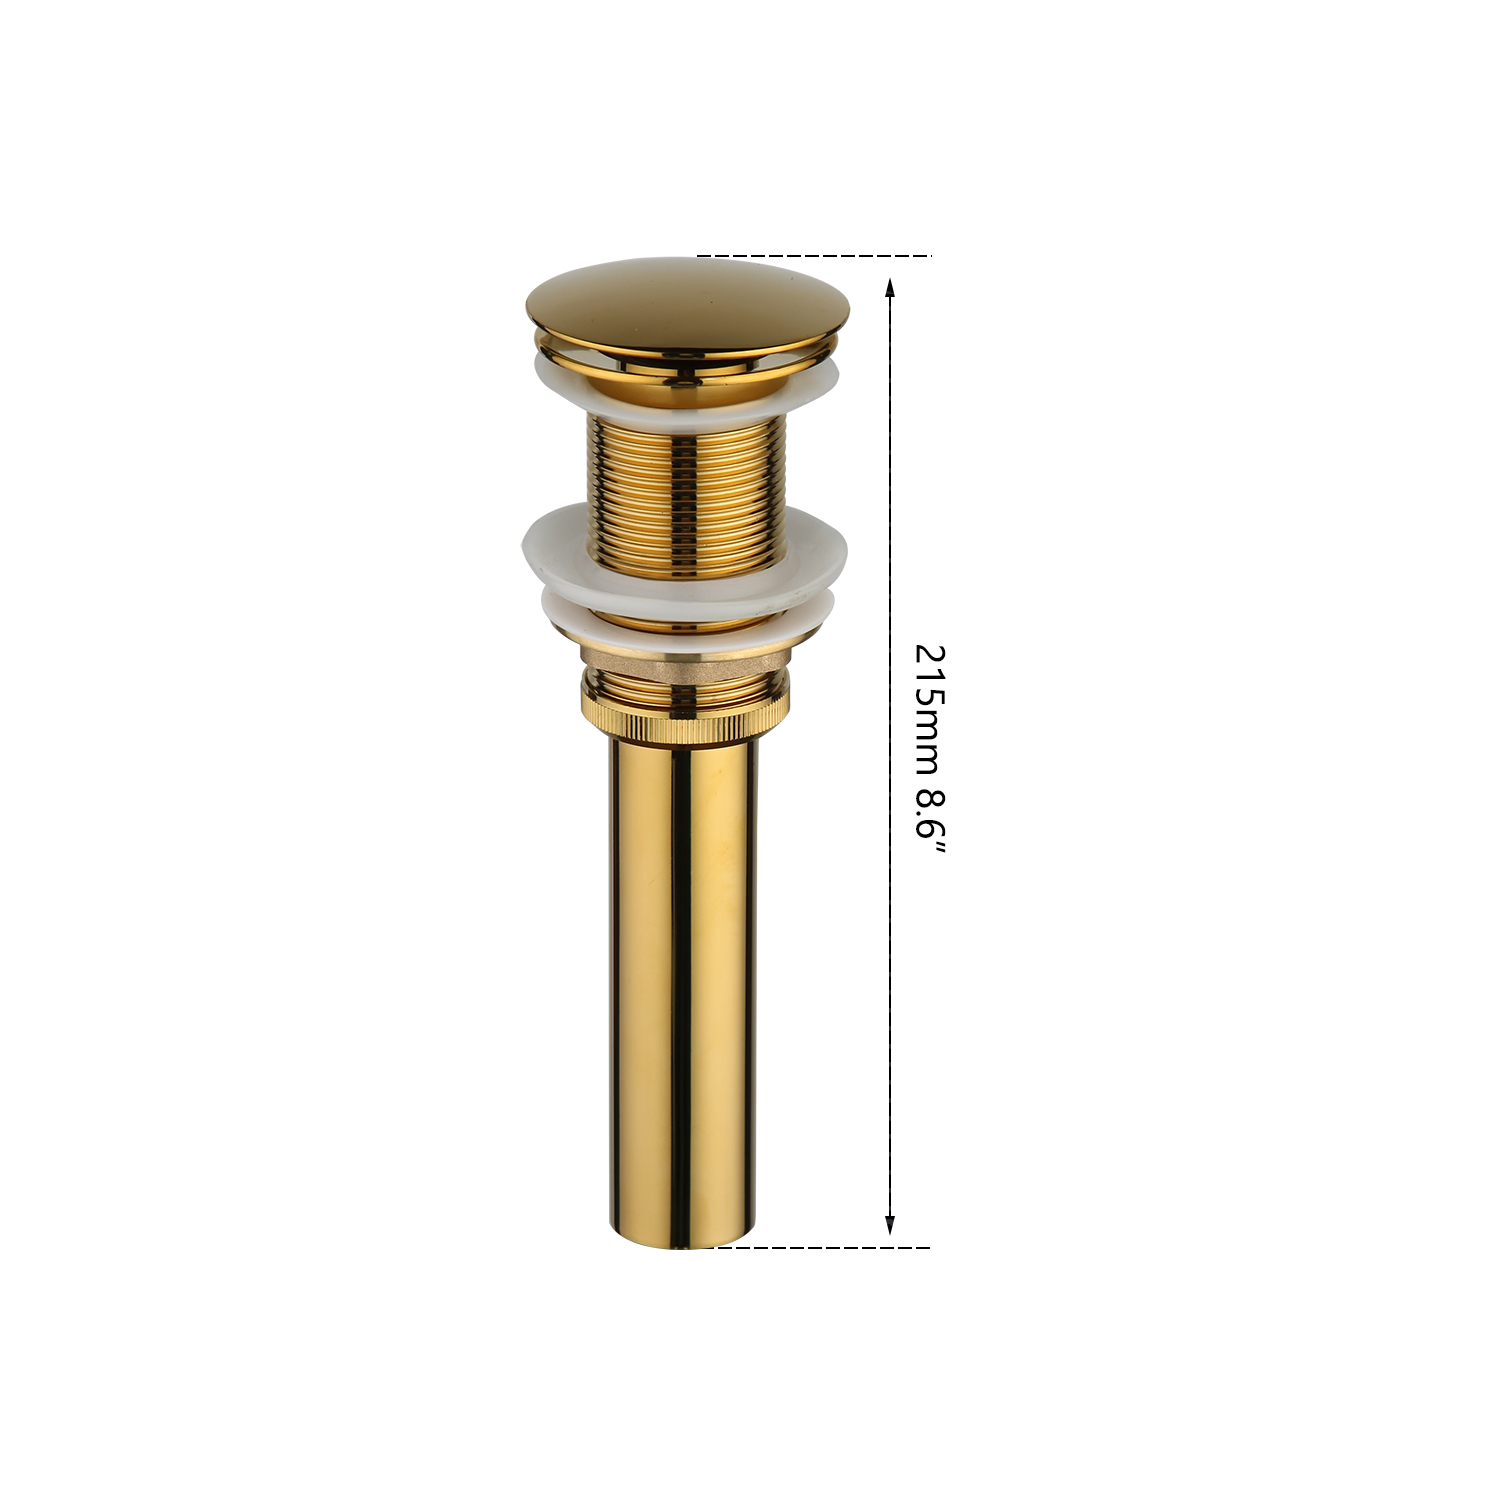 Monite Golden Polished Without Overflow Sink Waste Drain Gold Plated Construction & Real Estate Faucet Accessories Pop Up Drain